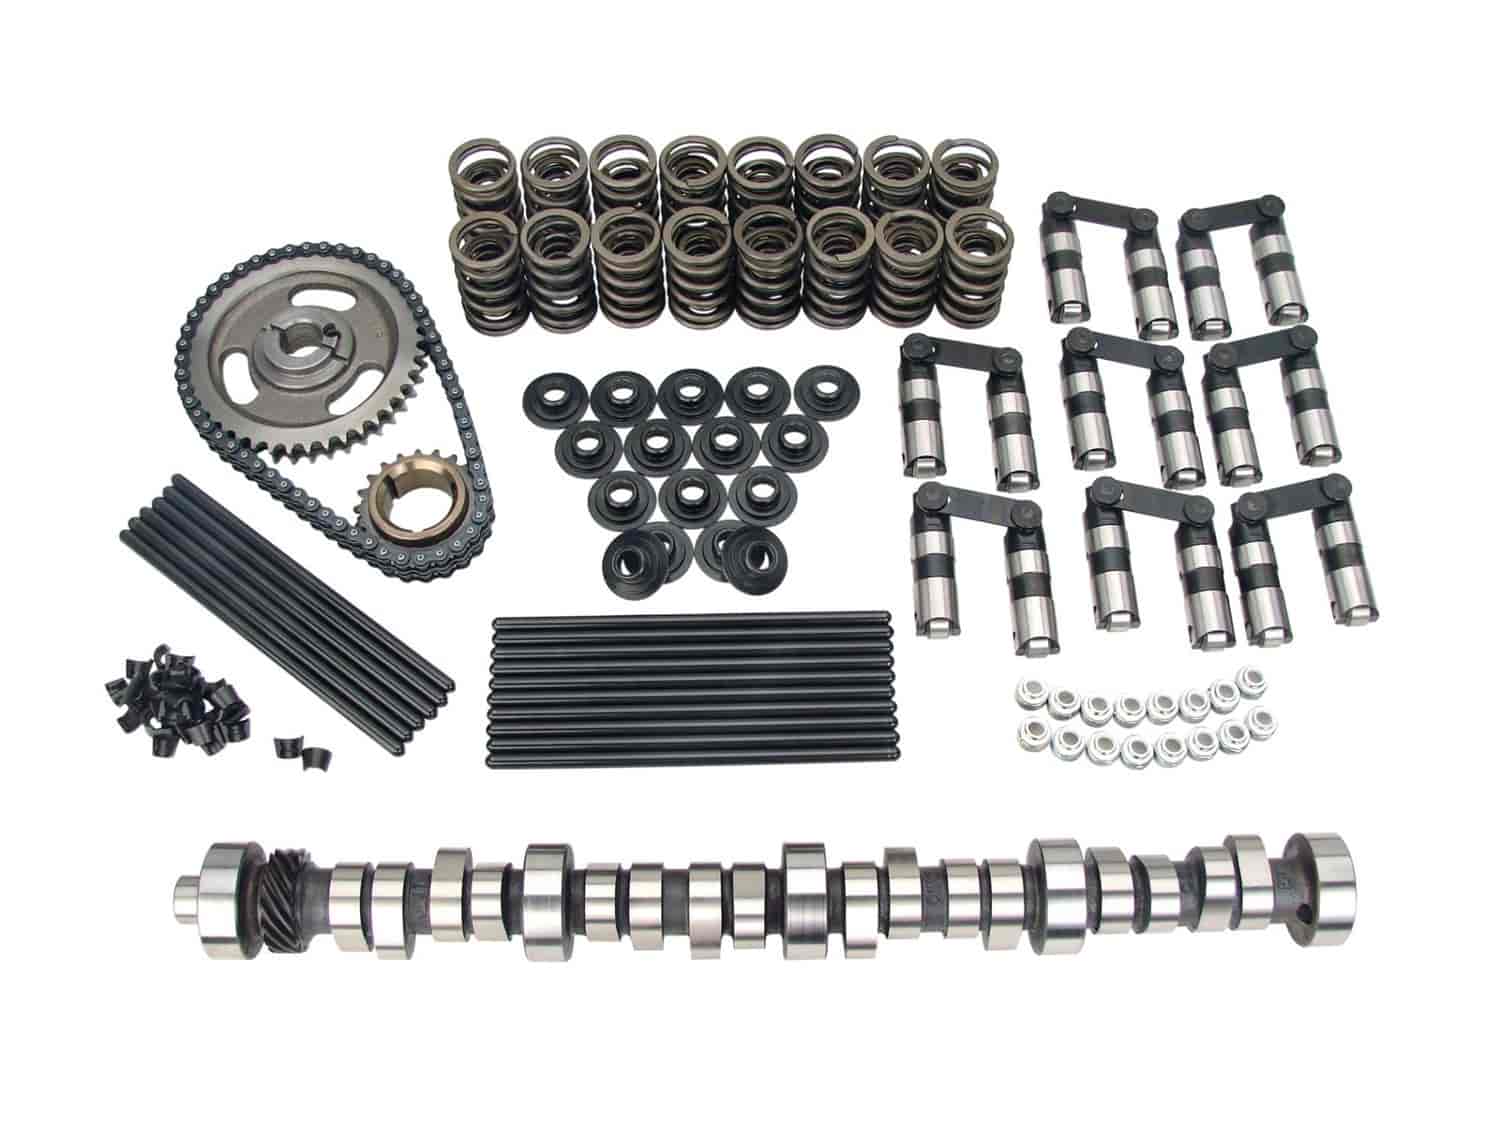 Nitrous HP Hyd. Roller Cam Complete Kit Ford 5.0L 1985-95 Factory Roller Lift: .512"/.512"